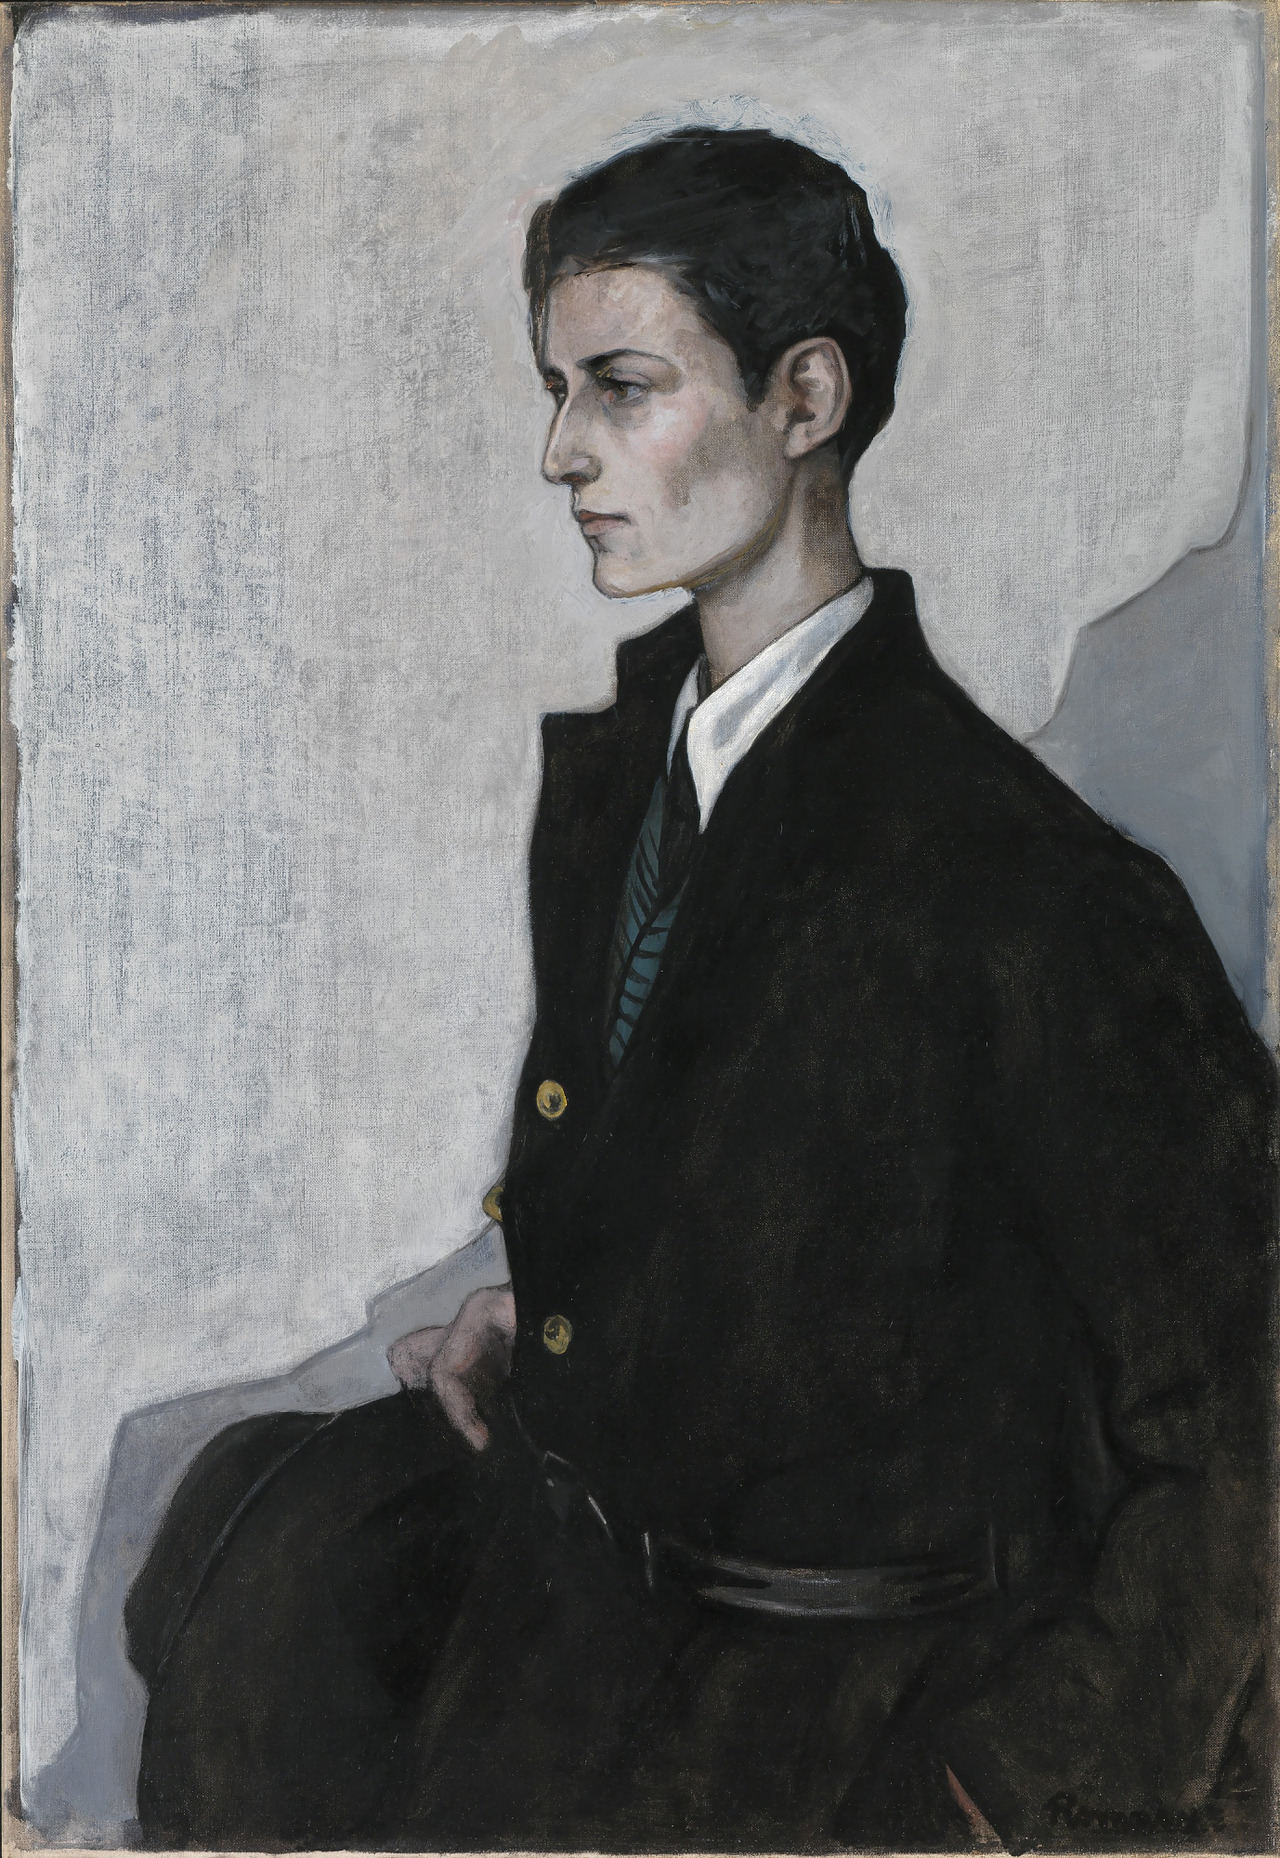 lesbianherstorian:“peter (a young english girl)”, a portrait of the painter gluck